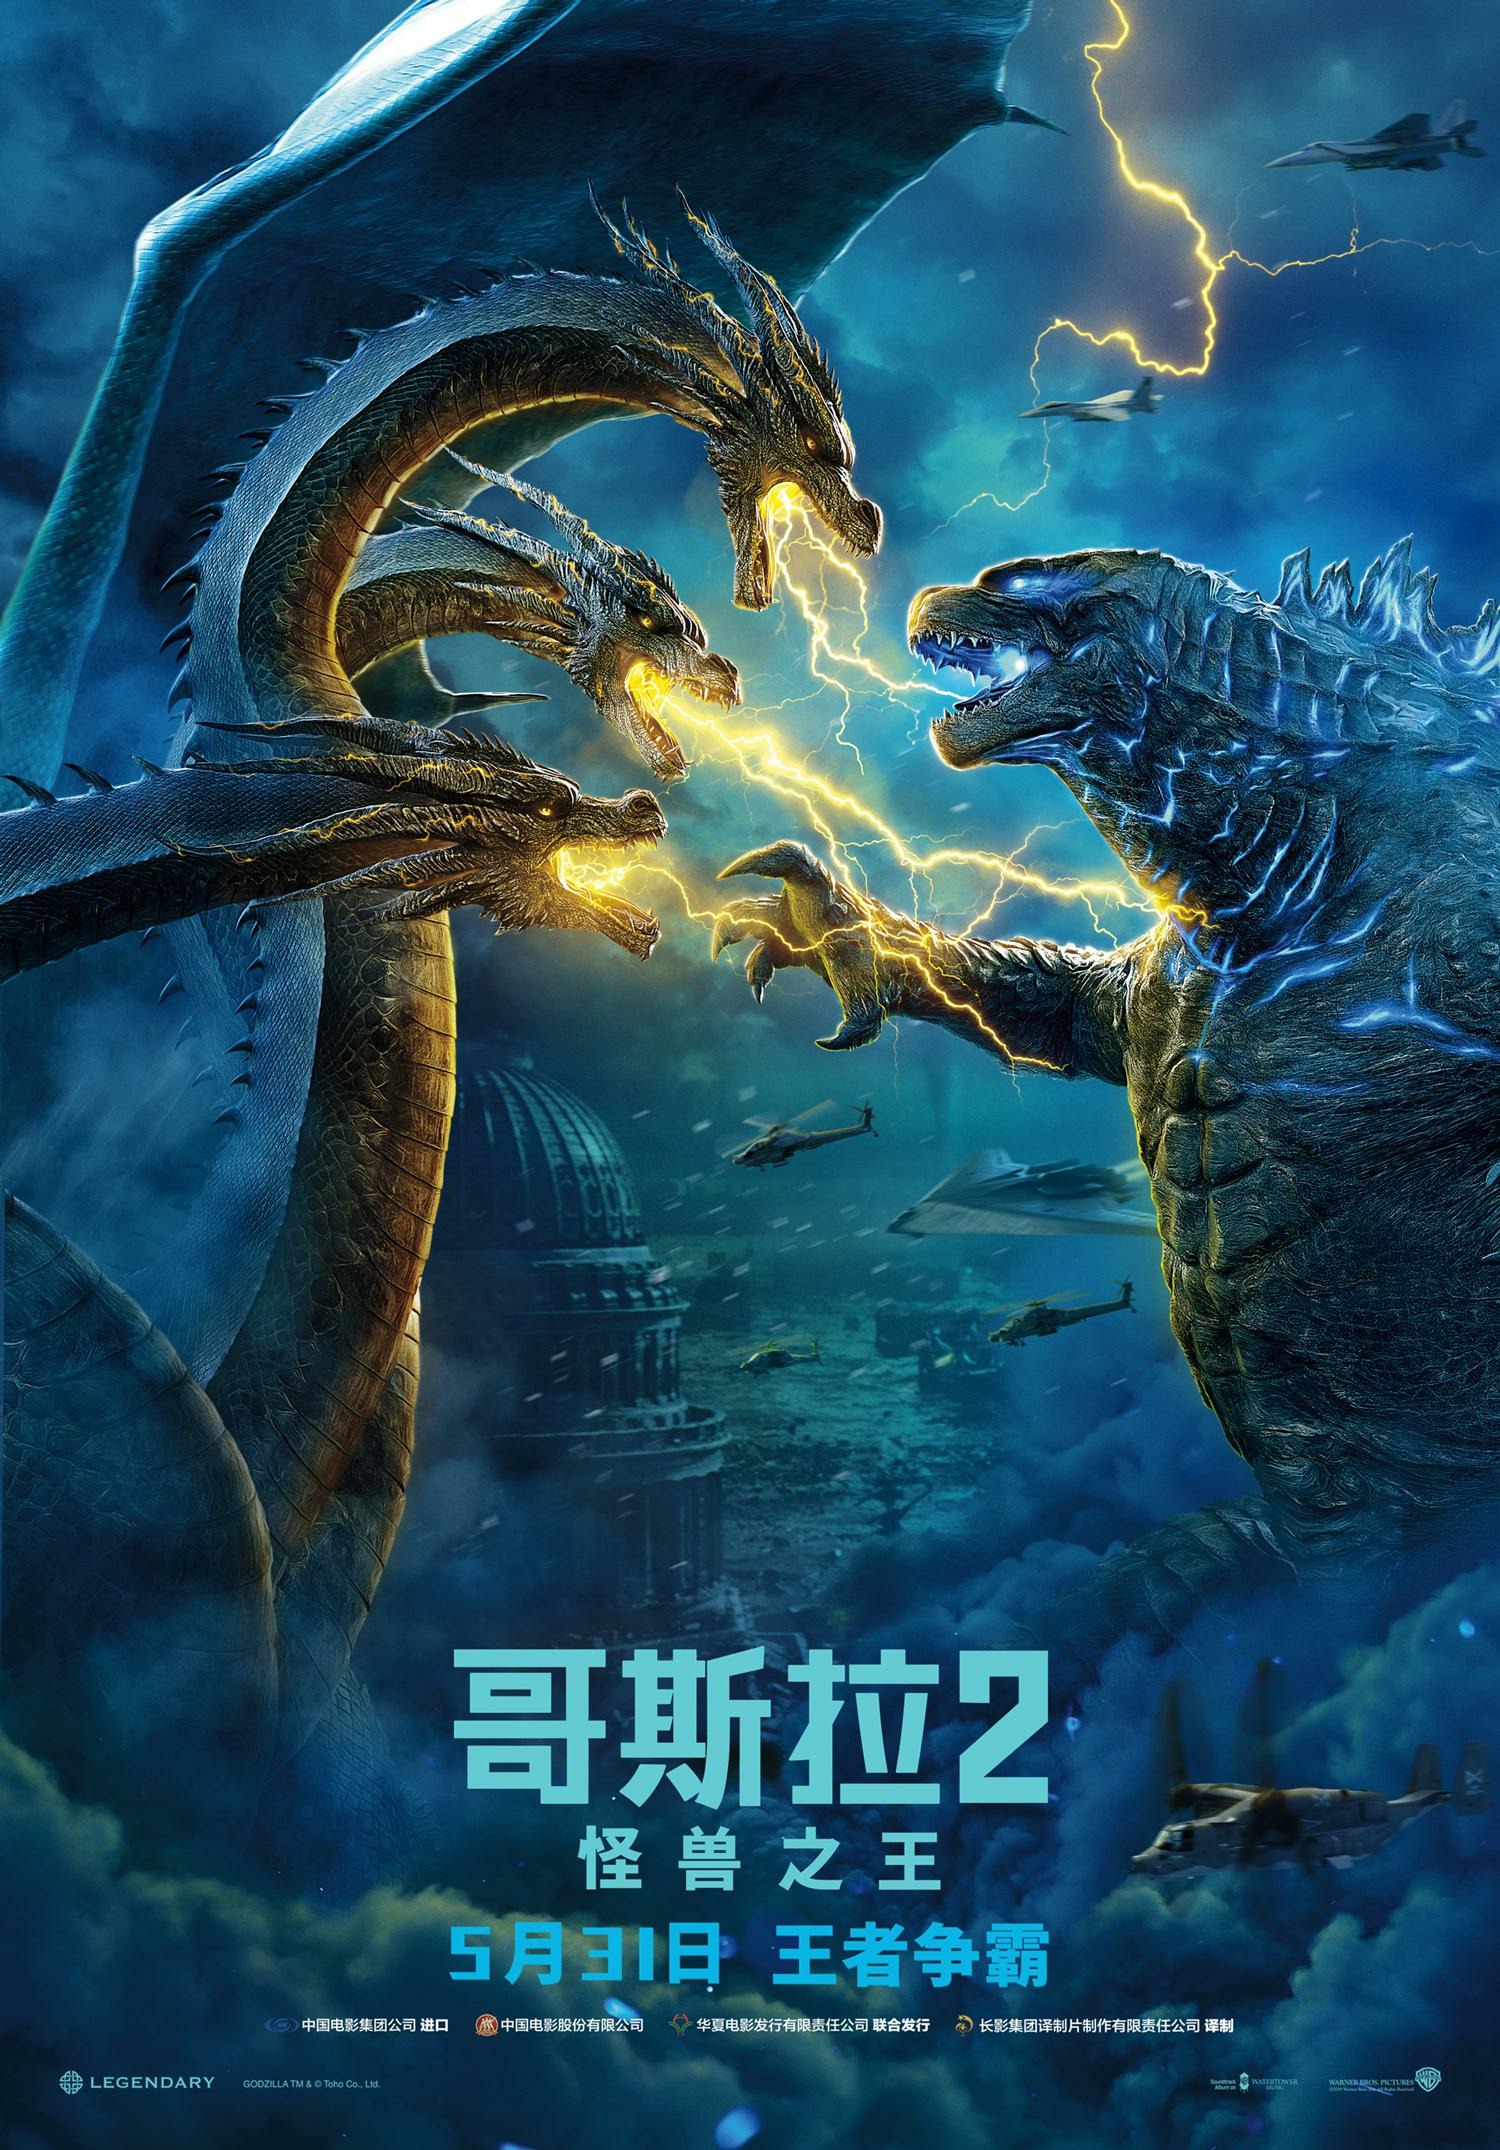 Mega Sized Movie Poster Image for Godzilla: King of the Monsters (#10 of 27)